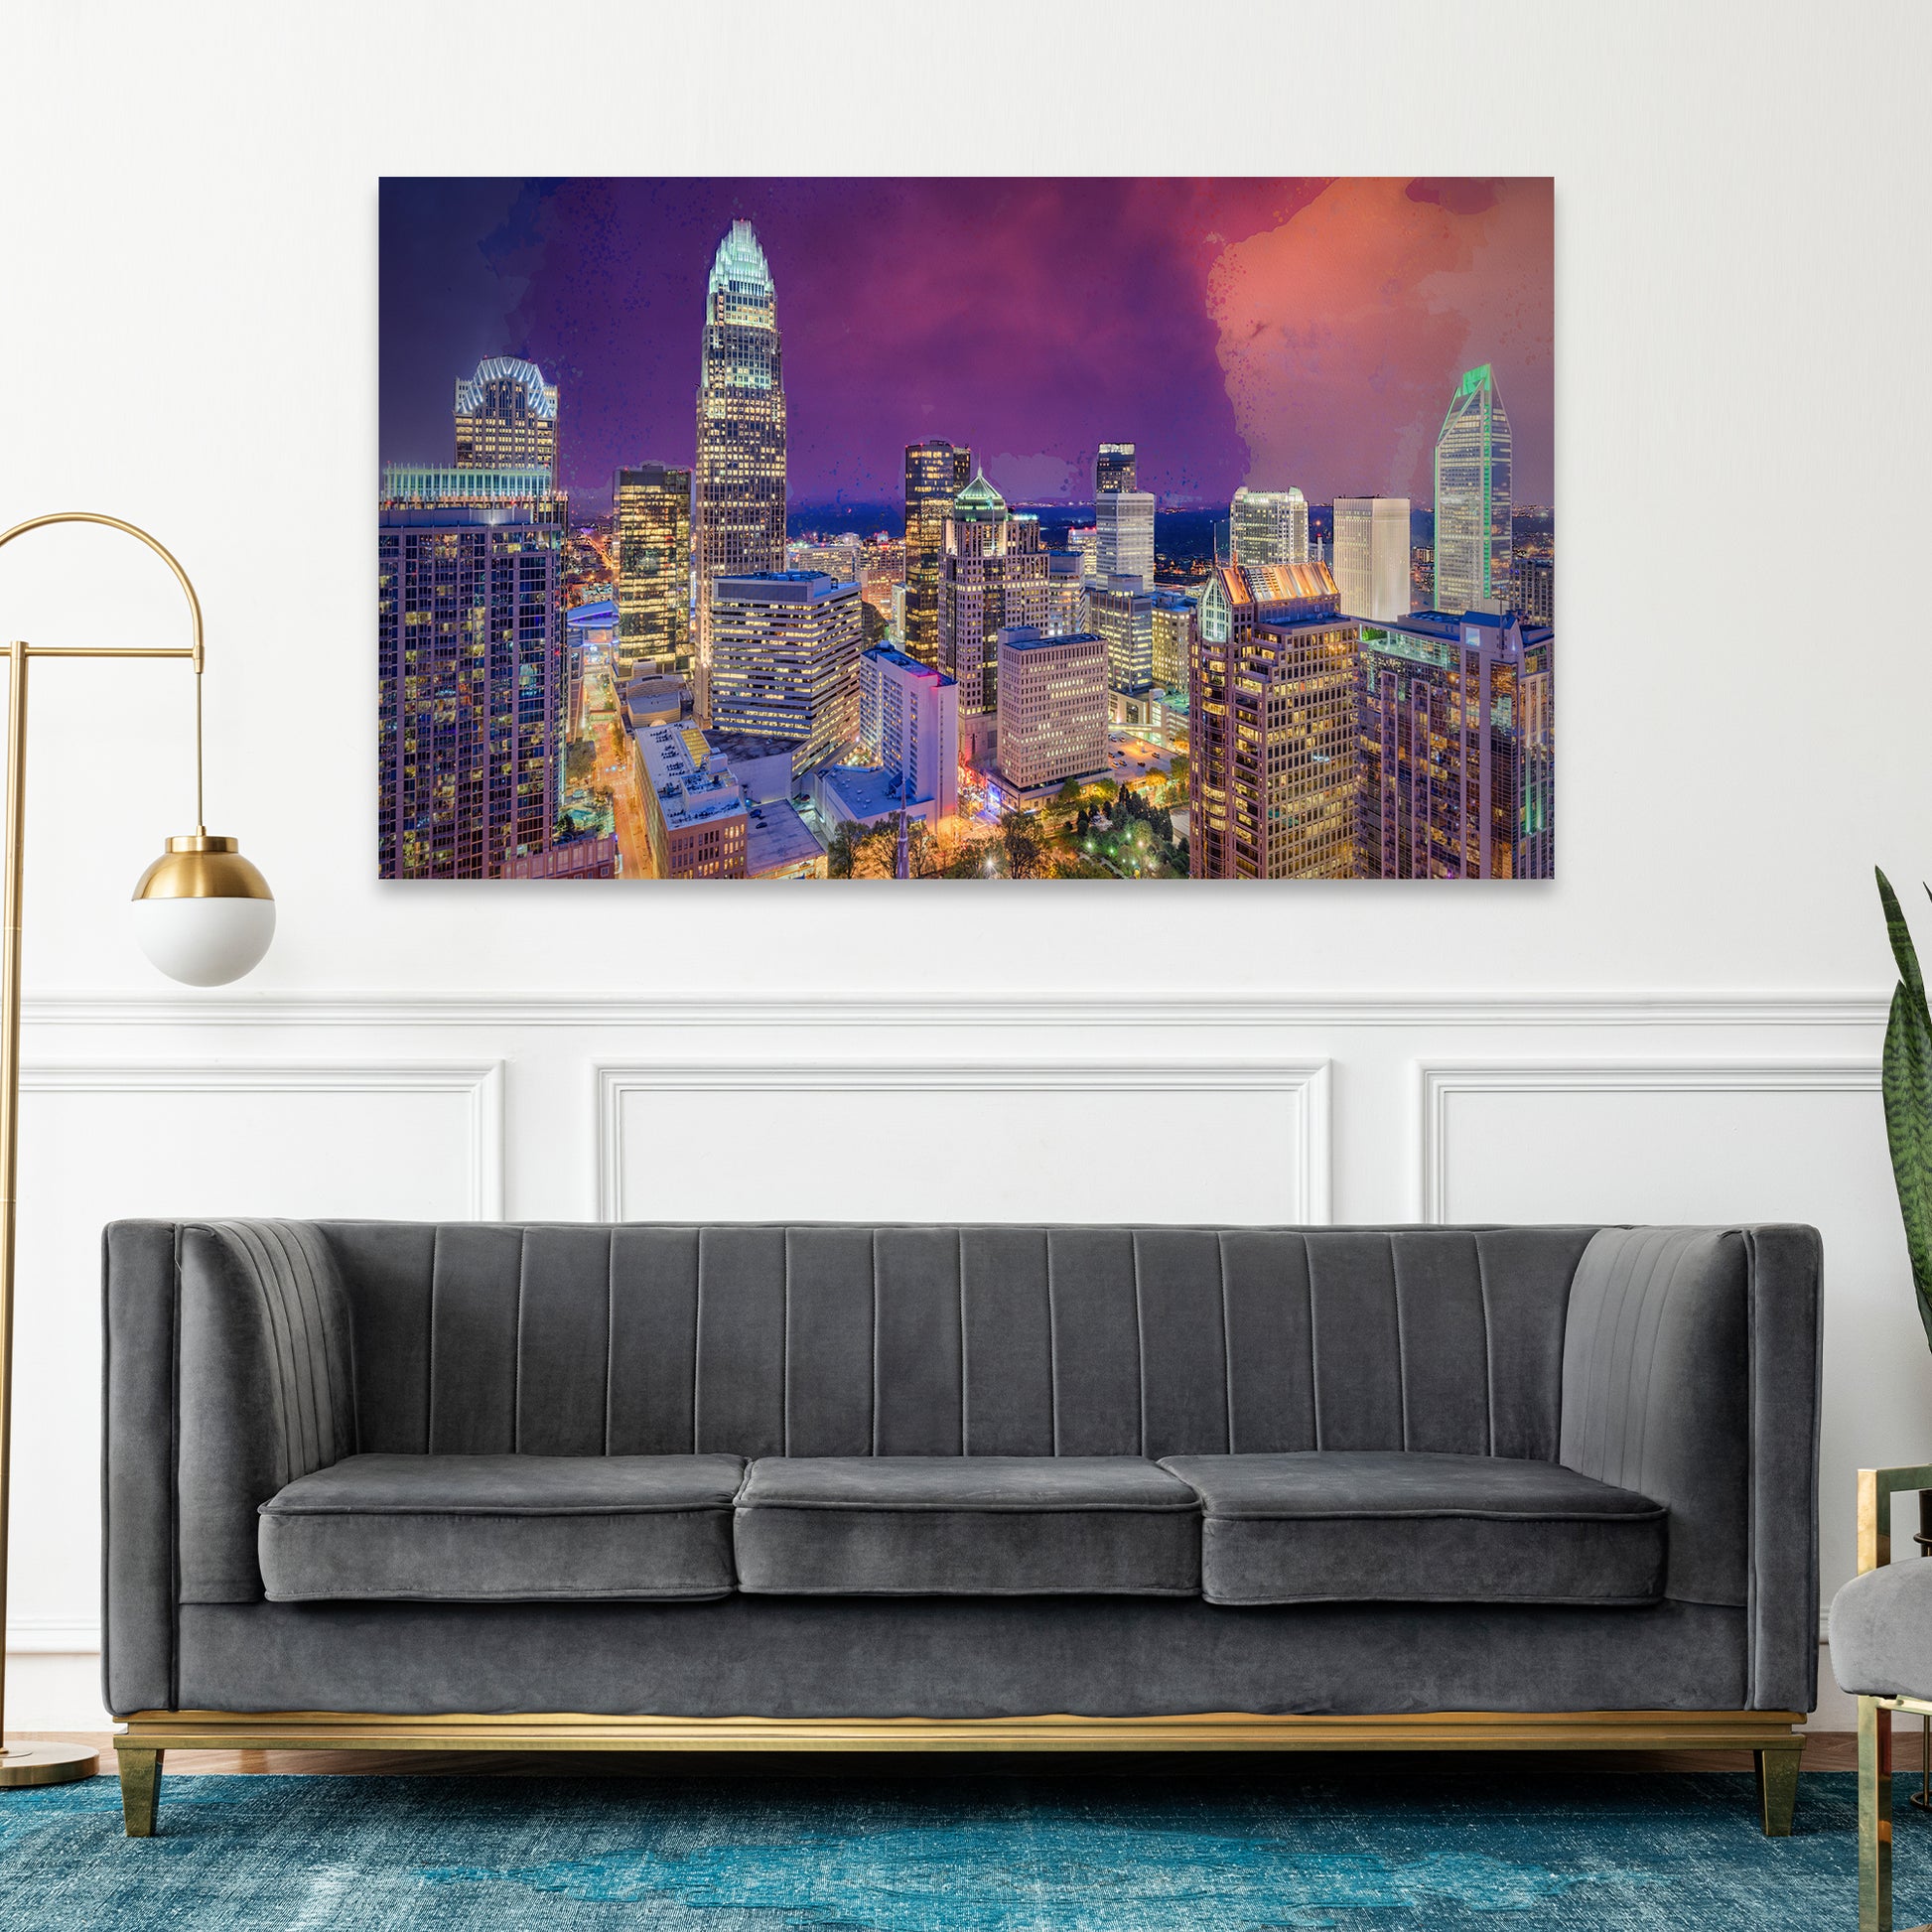 Charlotte Skyline Queen City At Dusk Canvas Wall Art Style 2 - Image by Tailored Canvases